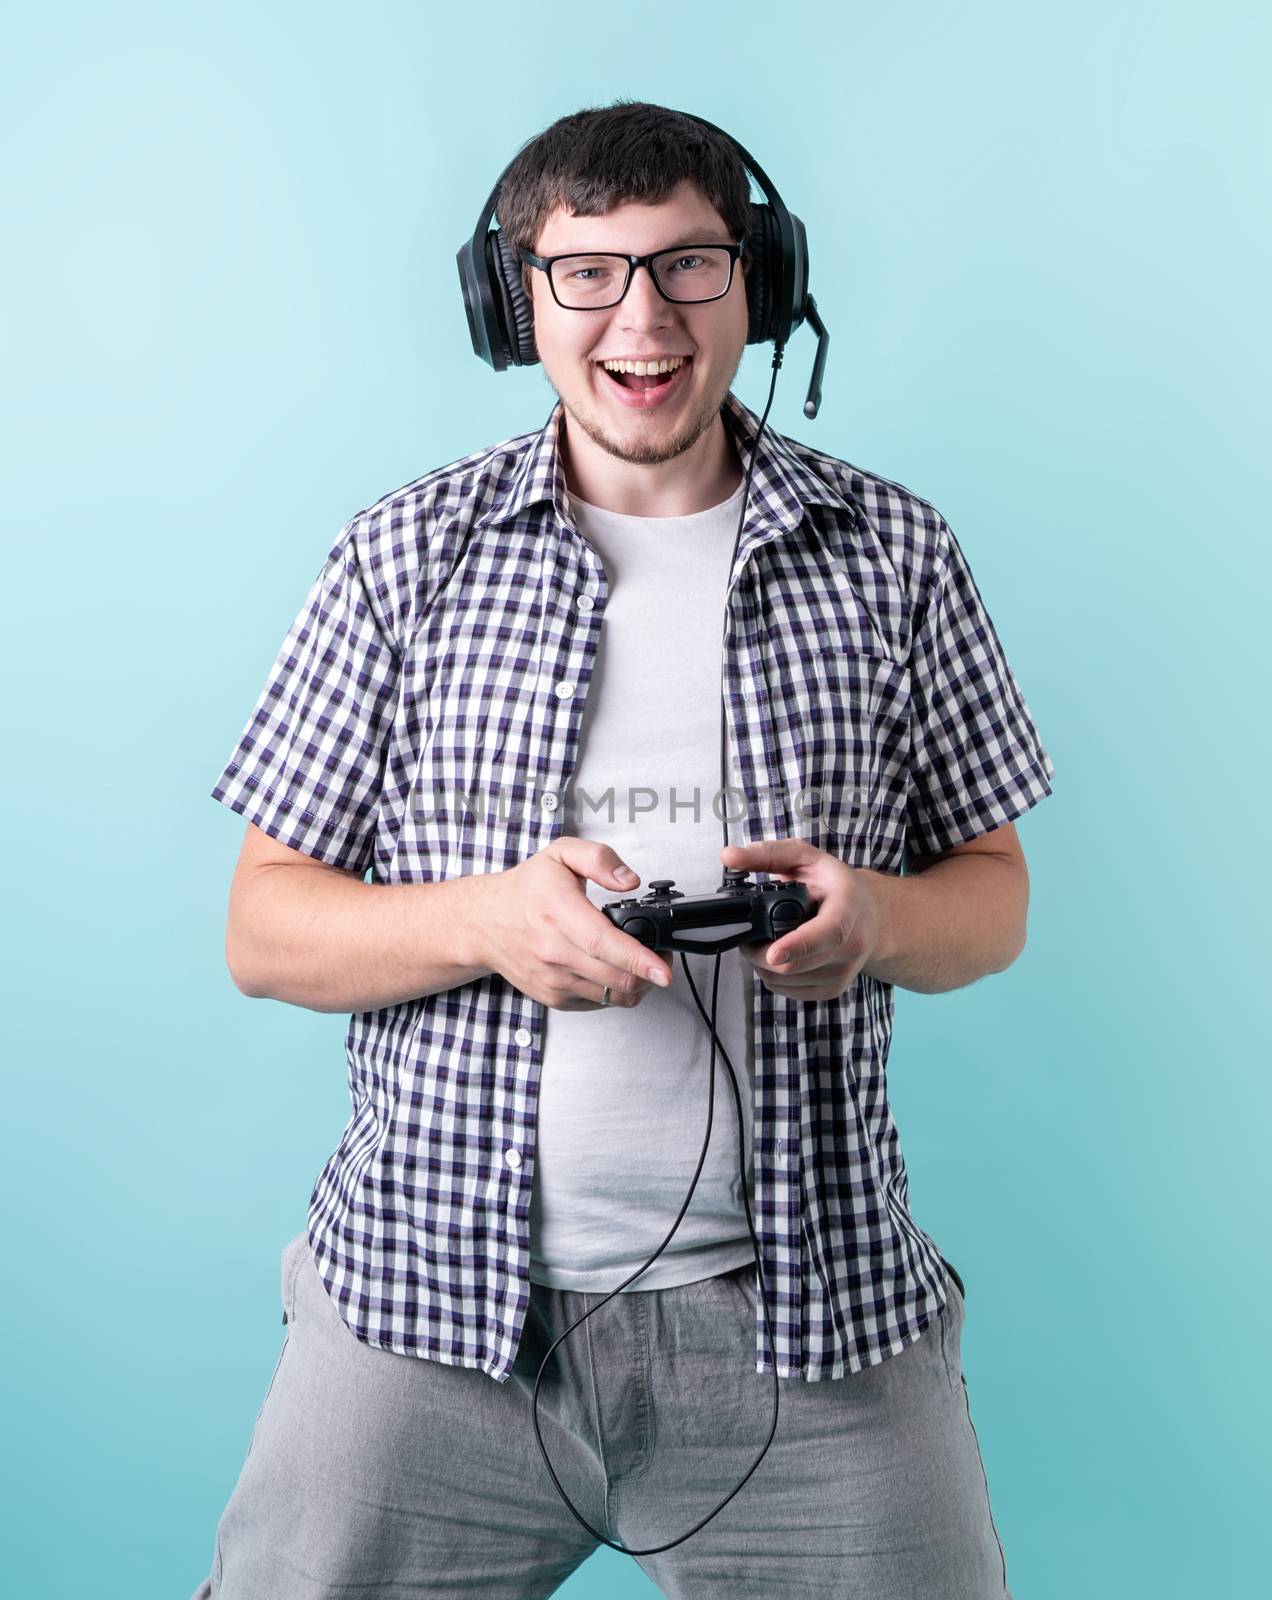 Happy laughing young man playing video games holding a joystick isolated on blue background by Desperada